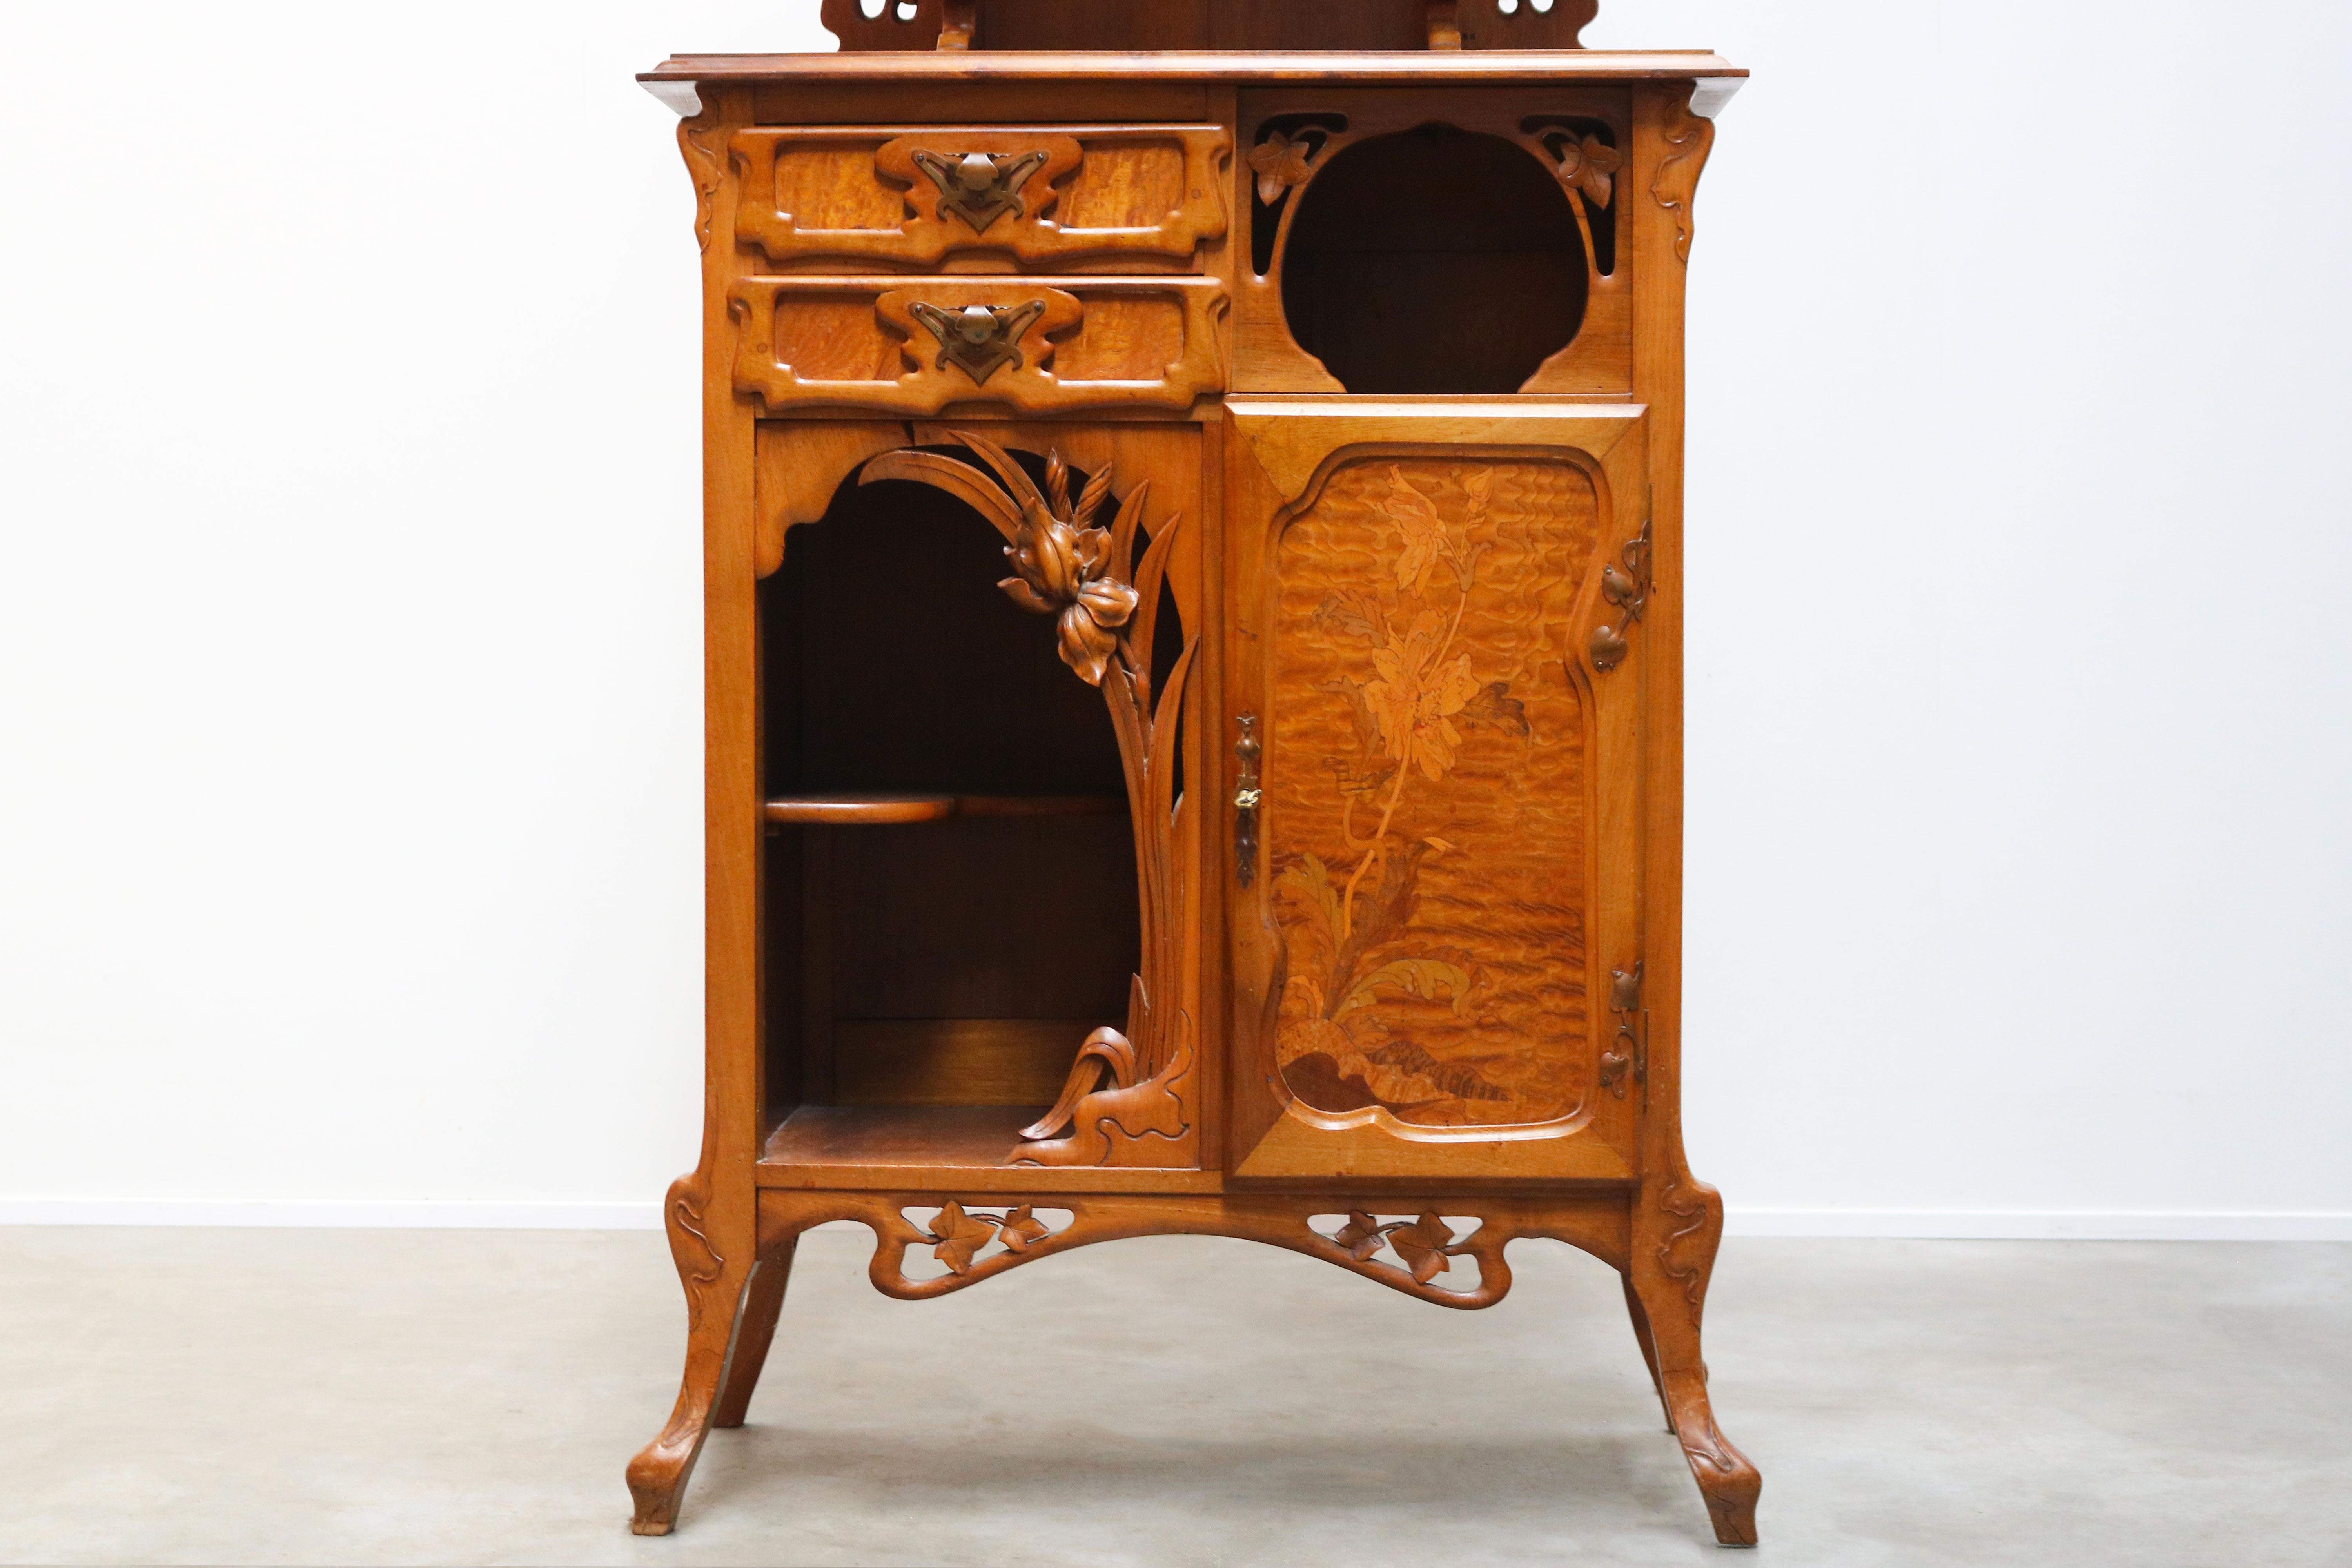 Gorgeous and most rare French Art Nouveau cabinet by Gabriel Viardot, 1890. Breathtaking floral Art Nouveau shapes with marquetry inlaid door using various kinds of wood. The cabinet has 2 drawers, 1 door and a display cabinet. Very small and